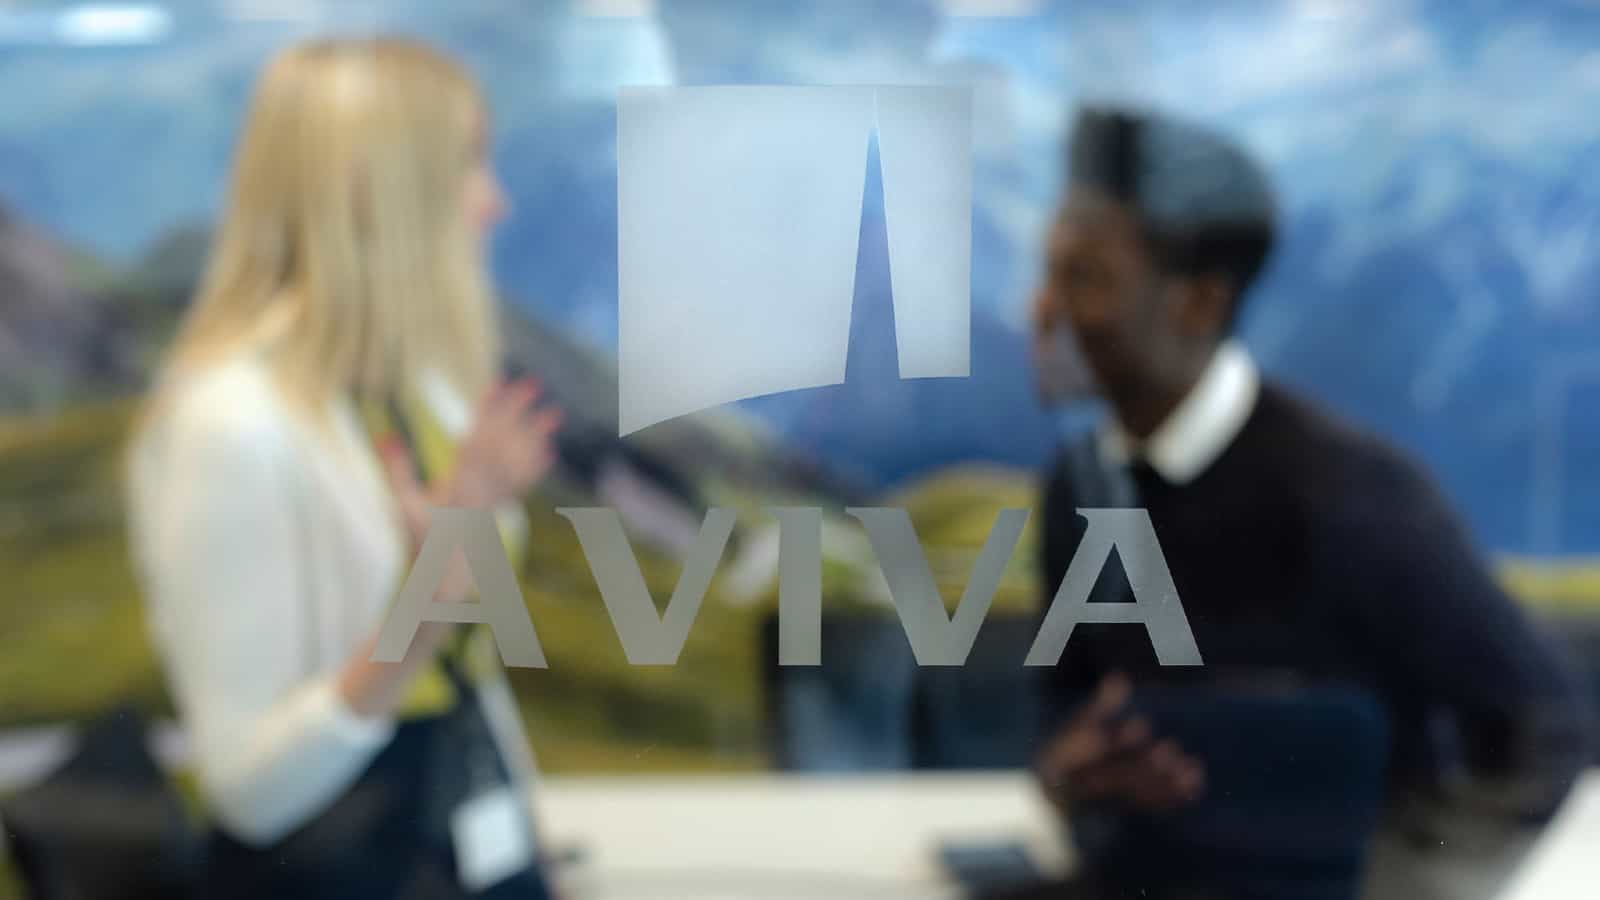 if i’d invested £5,000 in aviva shares 7 months ago, how much would i have now?